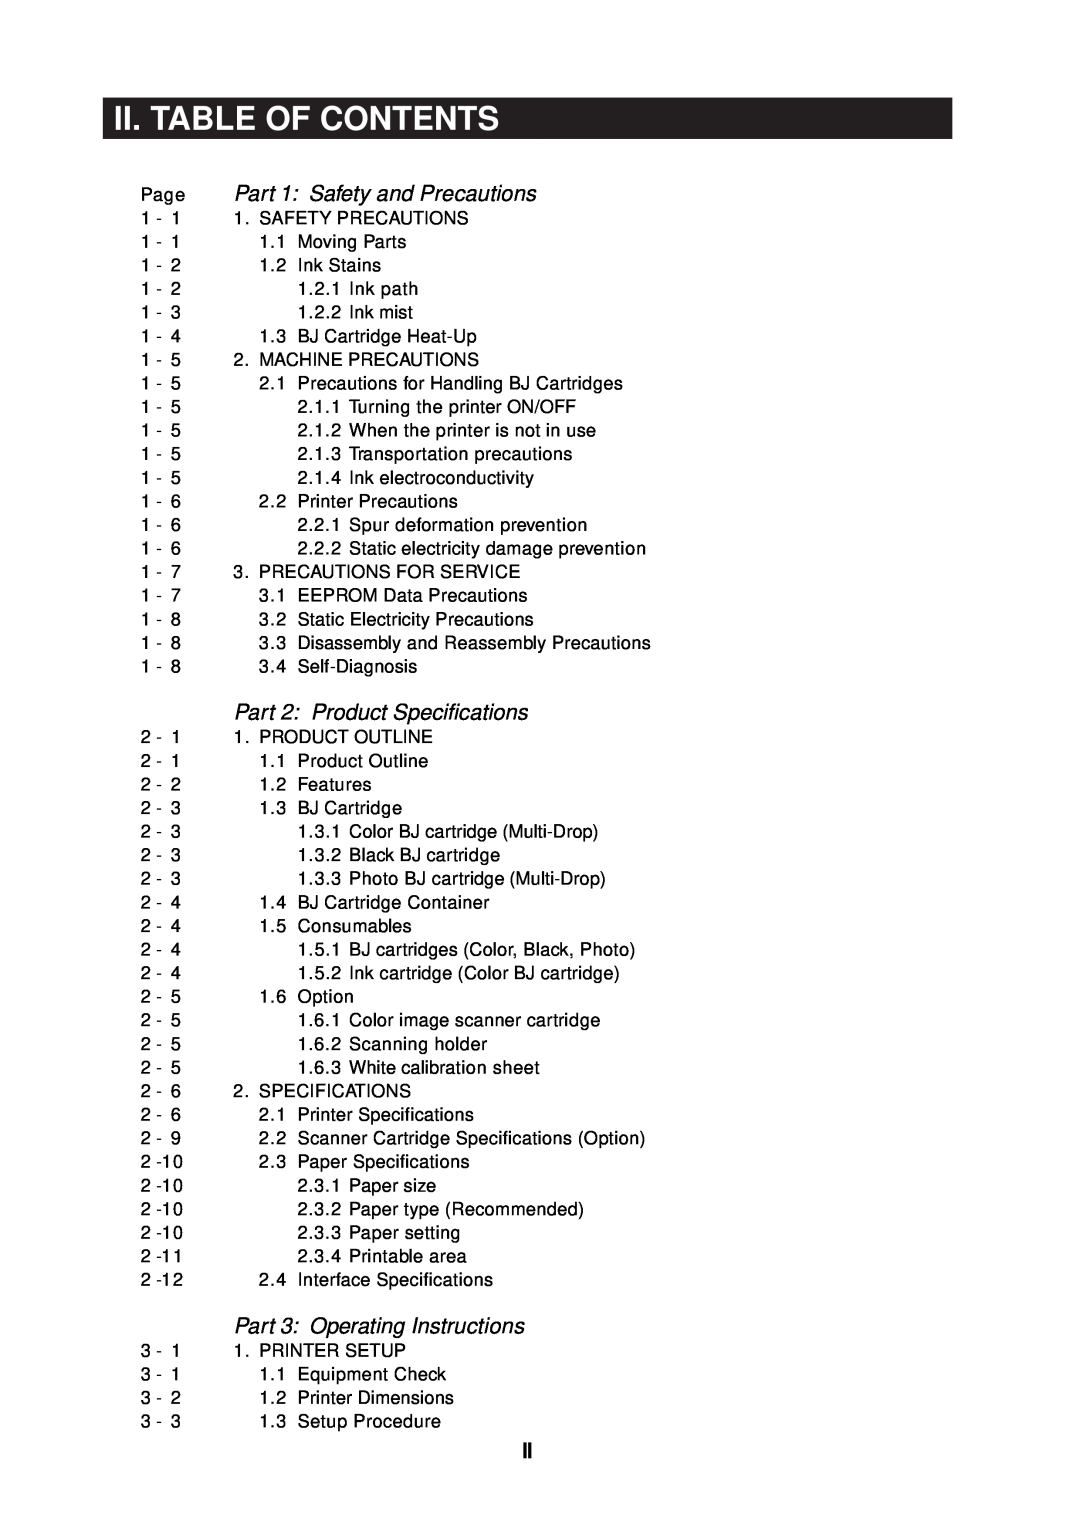 Canon 2000 manual Ii. Table Of Contents, Part 1 Safety and Precautions, Part 2 Product Specifications 